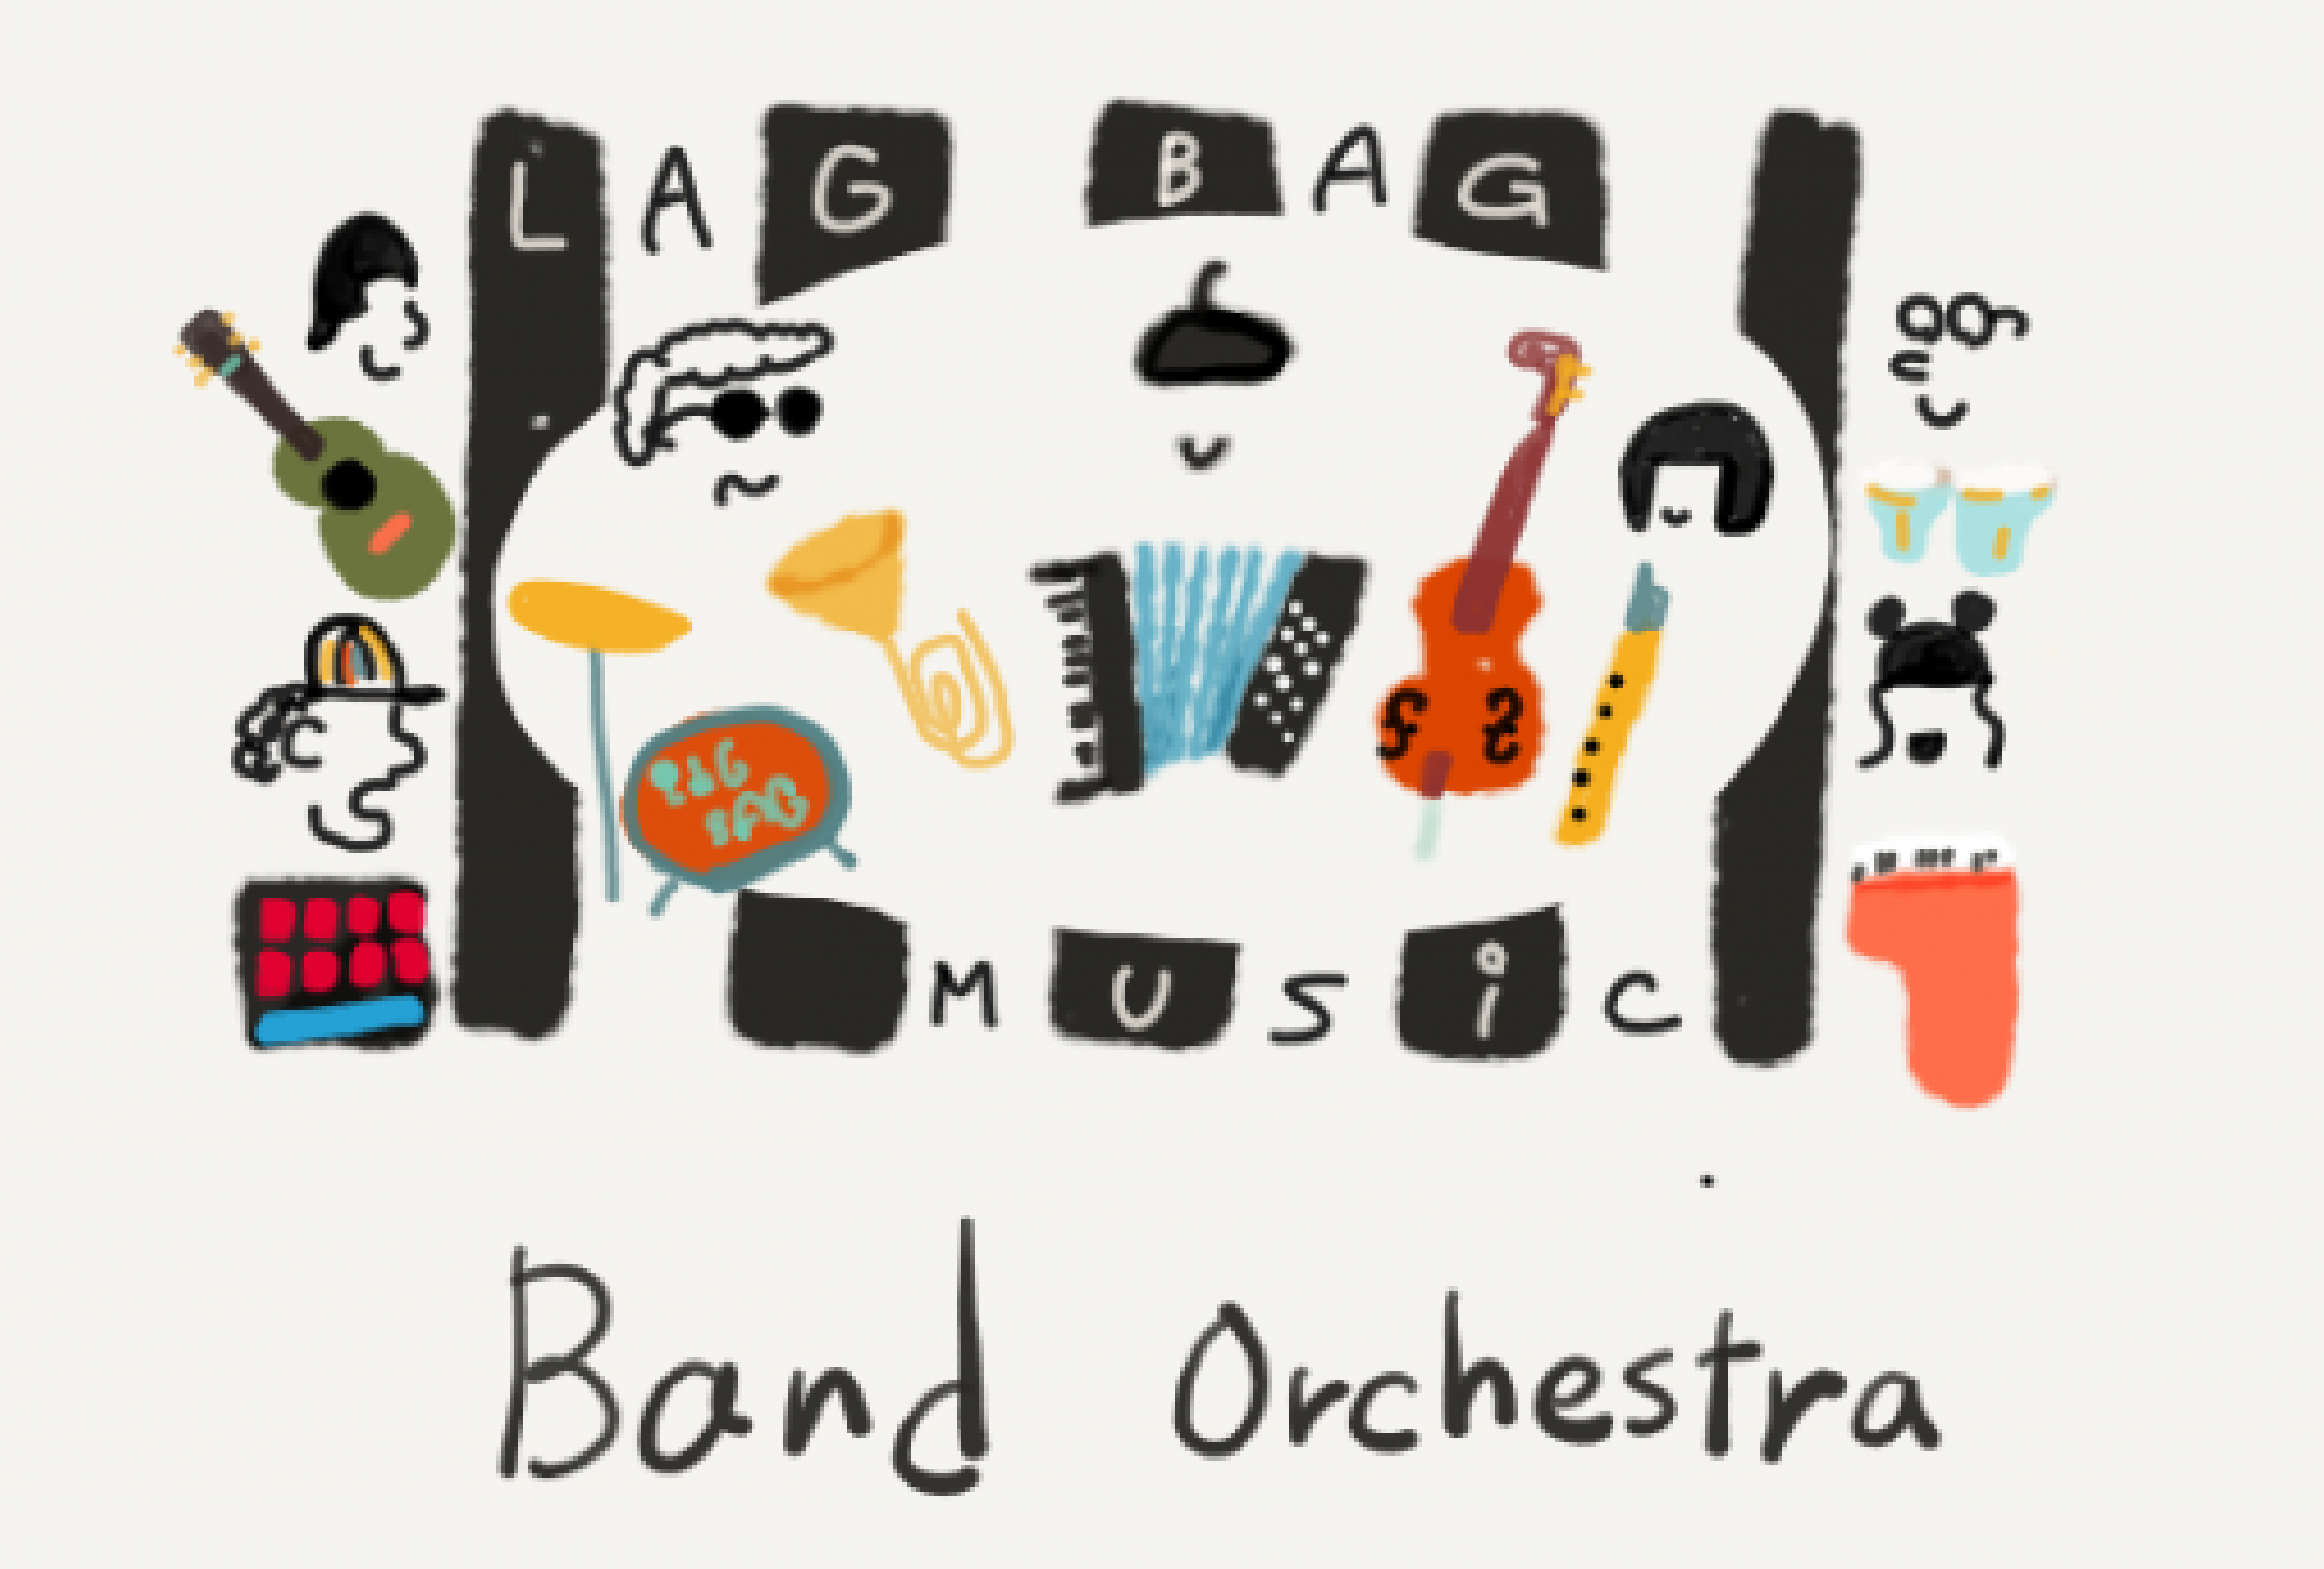 LAGBAG MUSIC ORCHESTRA003-01.png